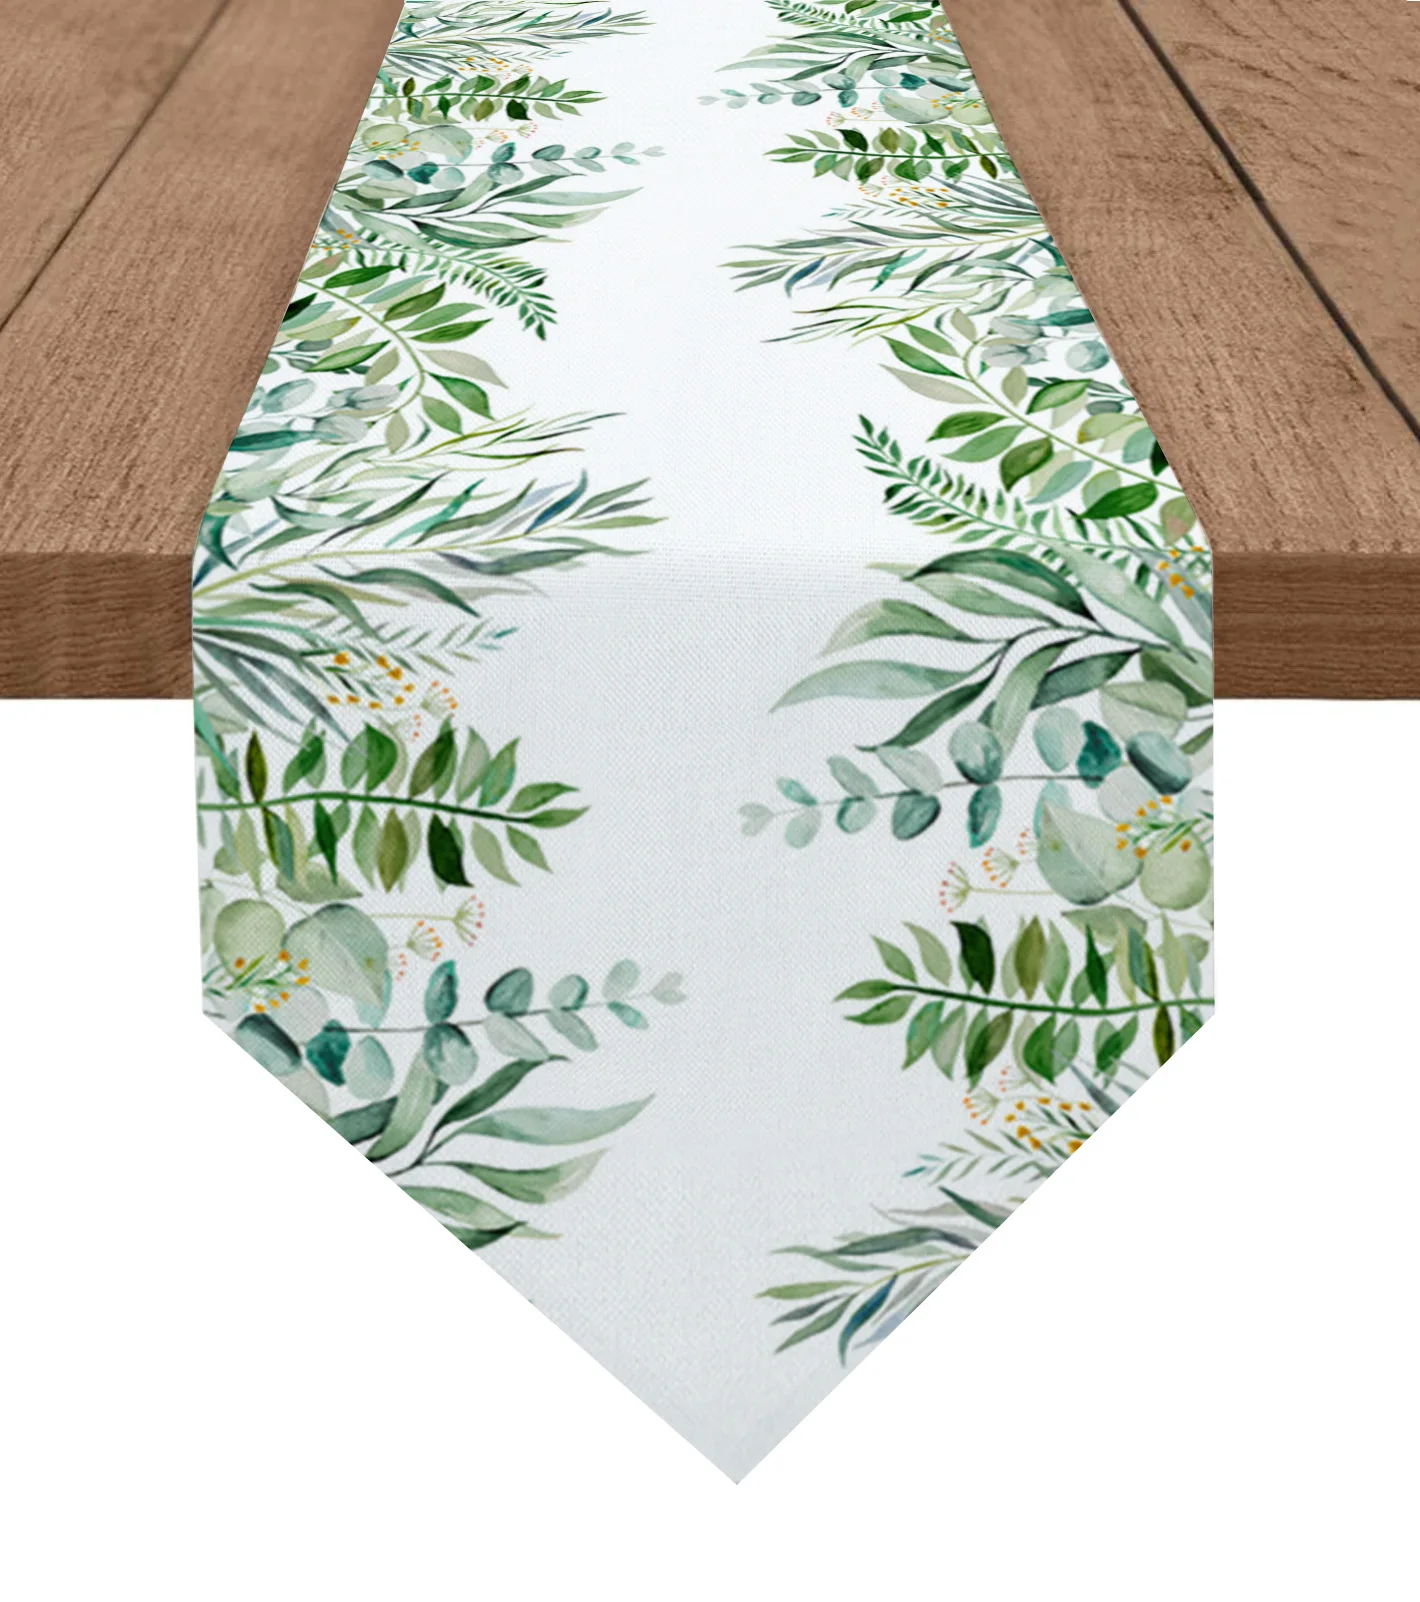 

Ins Style Tropical Plants Eucalyptus Leaves Table Runner Wedding Party Decor Tablecloth Holiday Kitchen Table Decor Table Runner